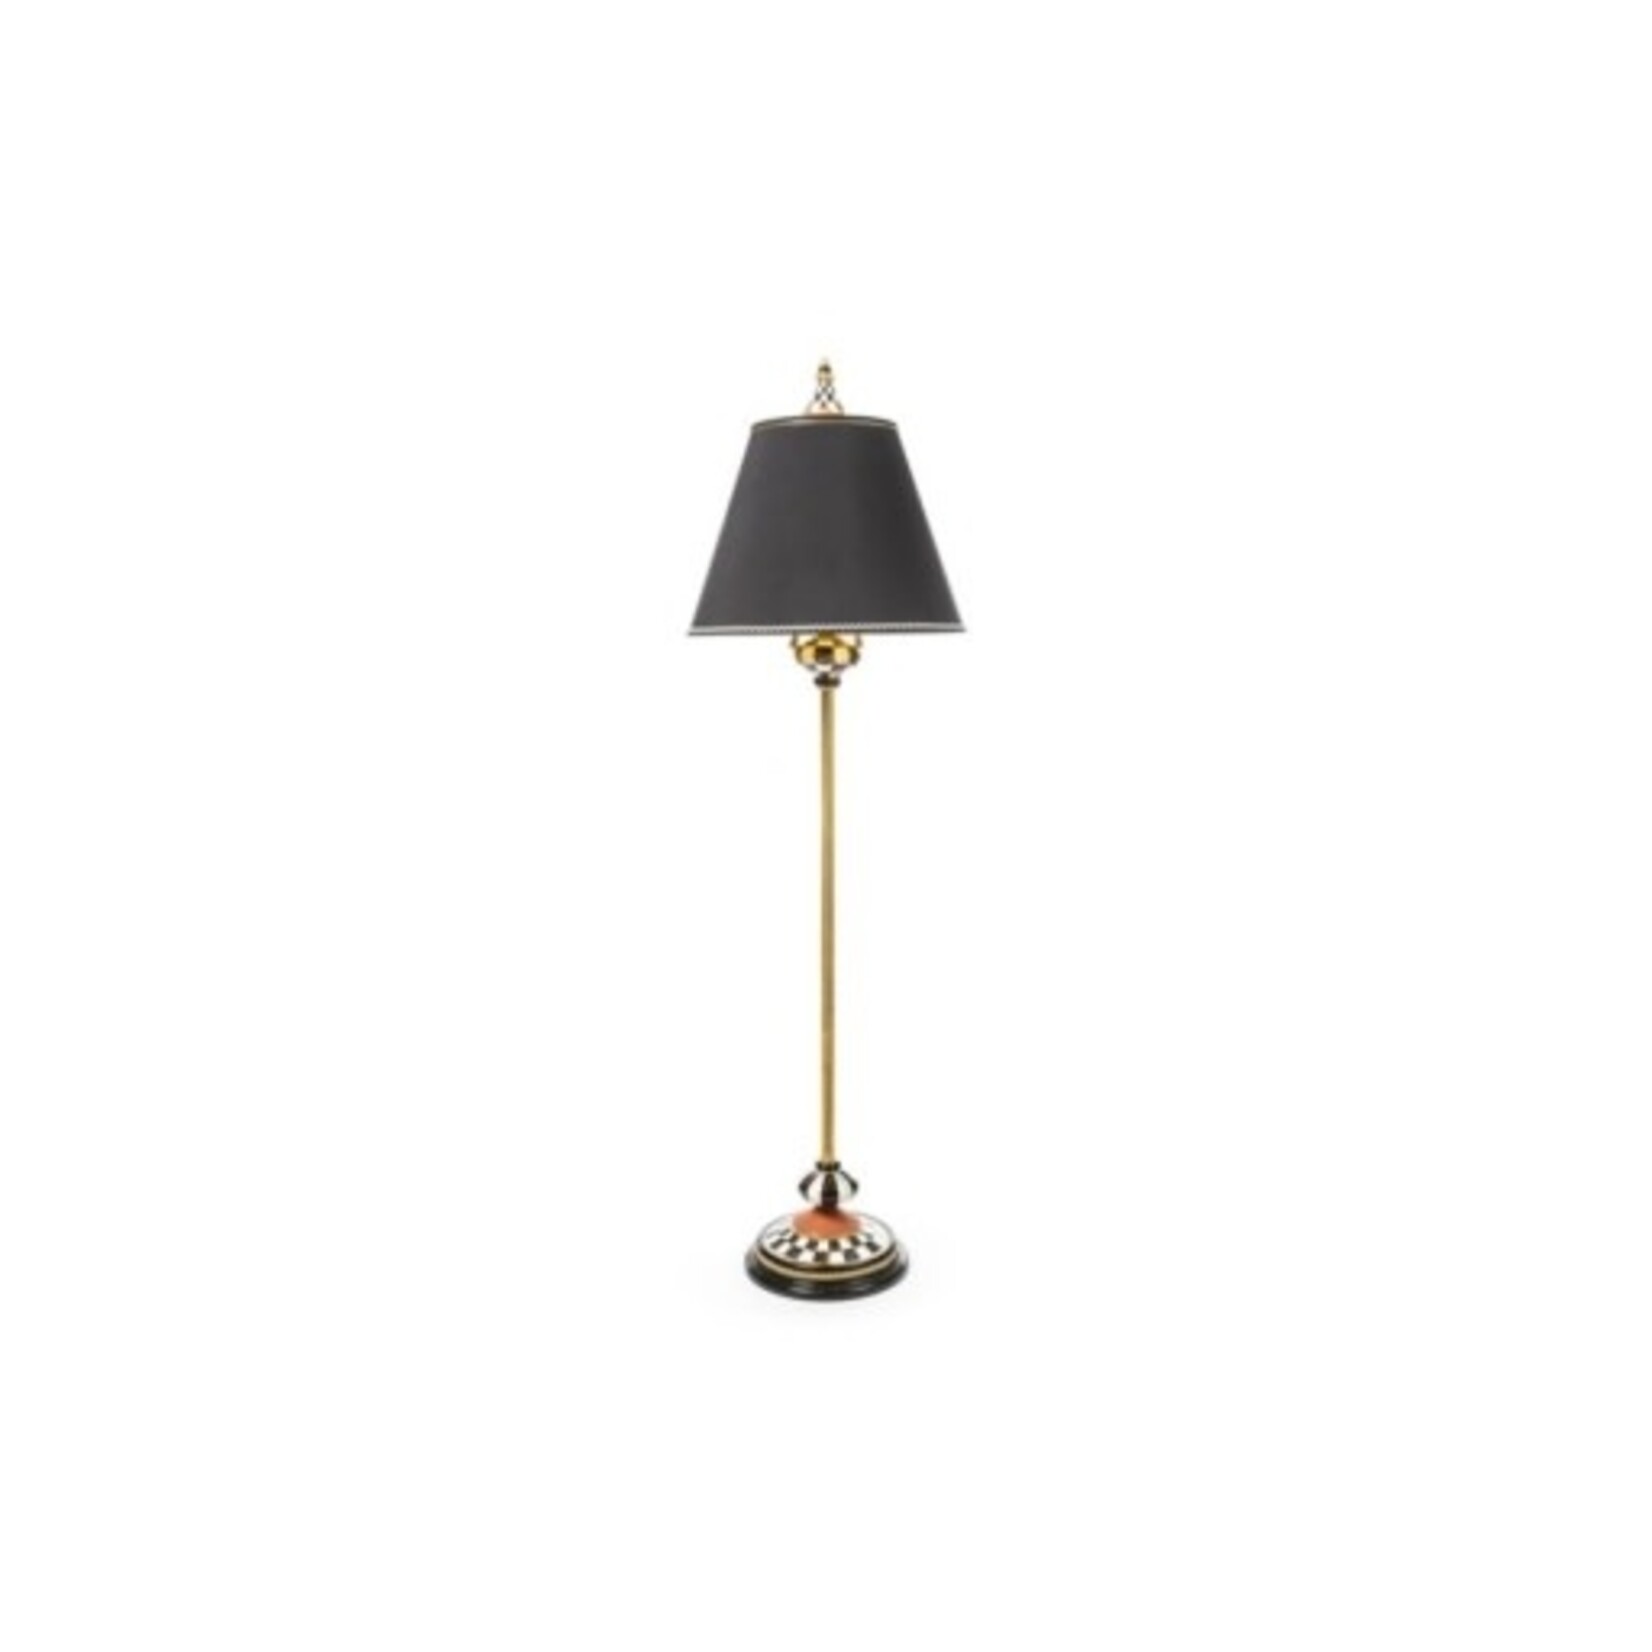 MacKenzie-Childs atelier floor lamp - courtly check